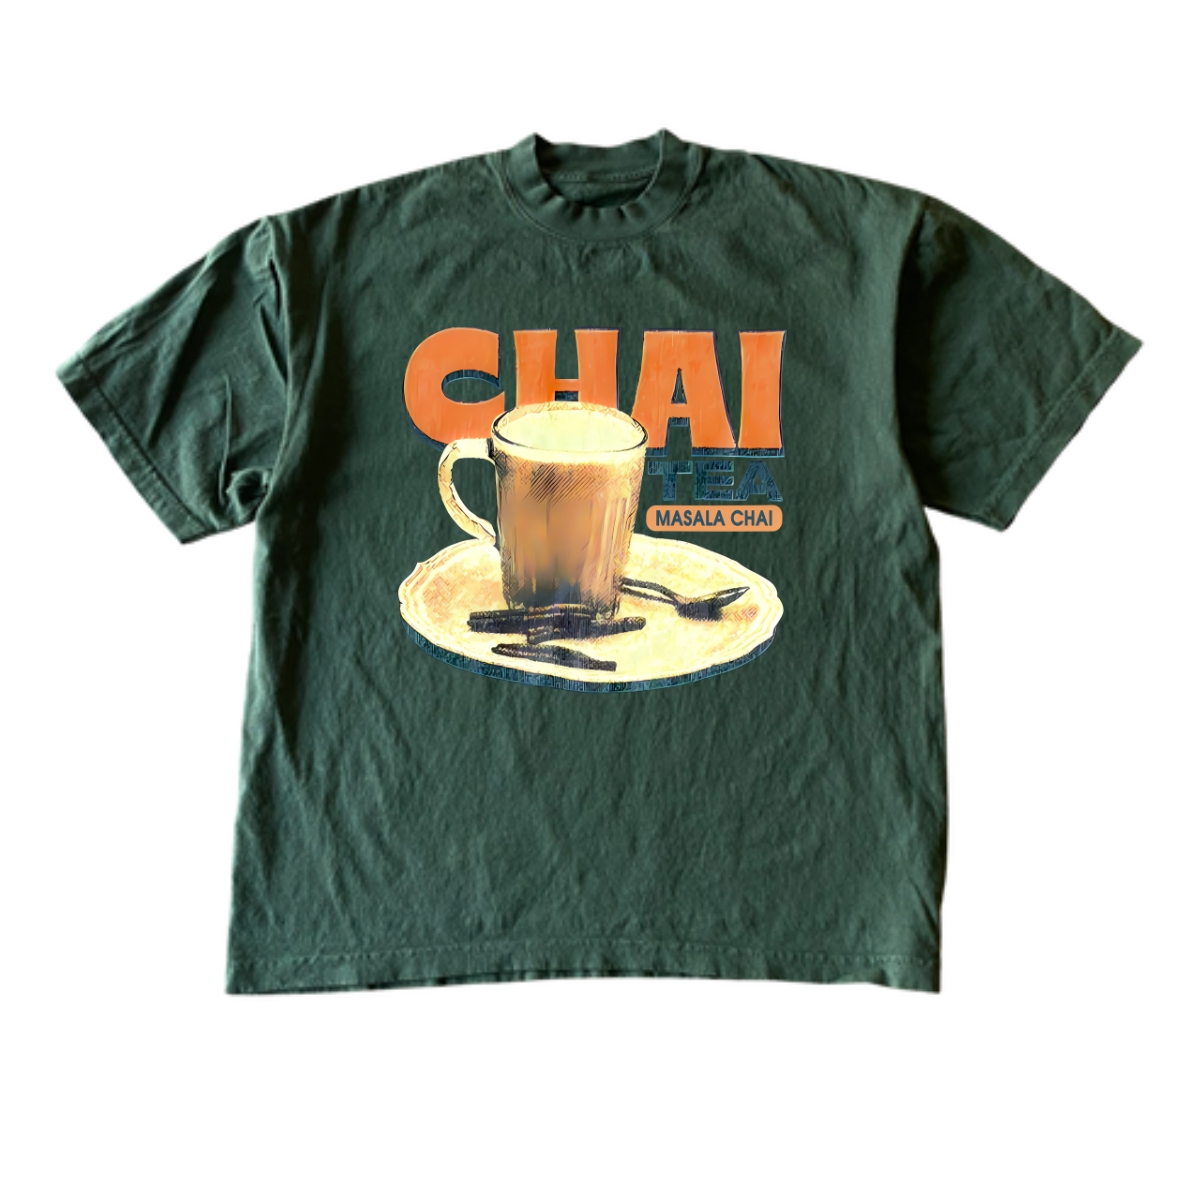 Chai Tea Tee Shirt Outfit, Gift for Men, Women And Young N105